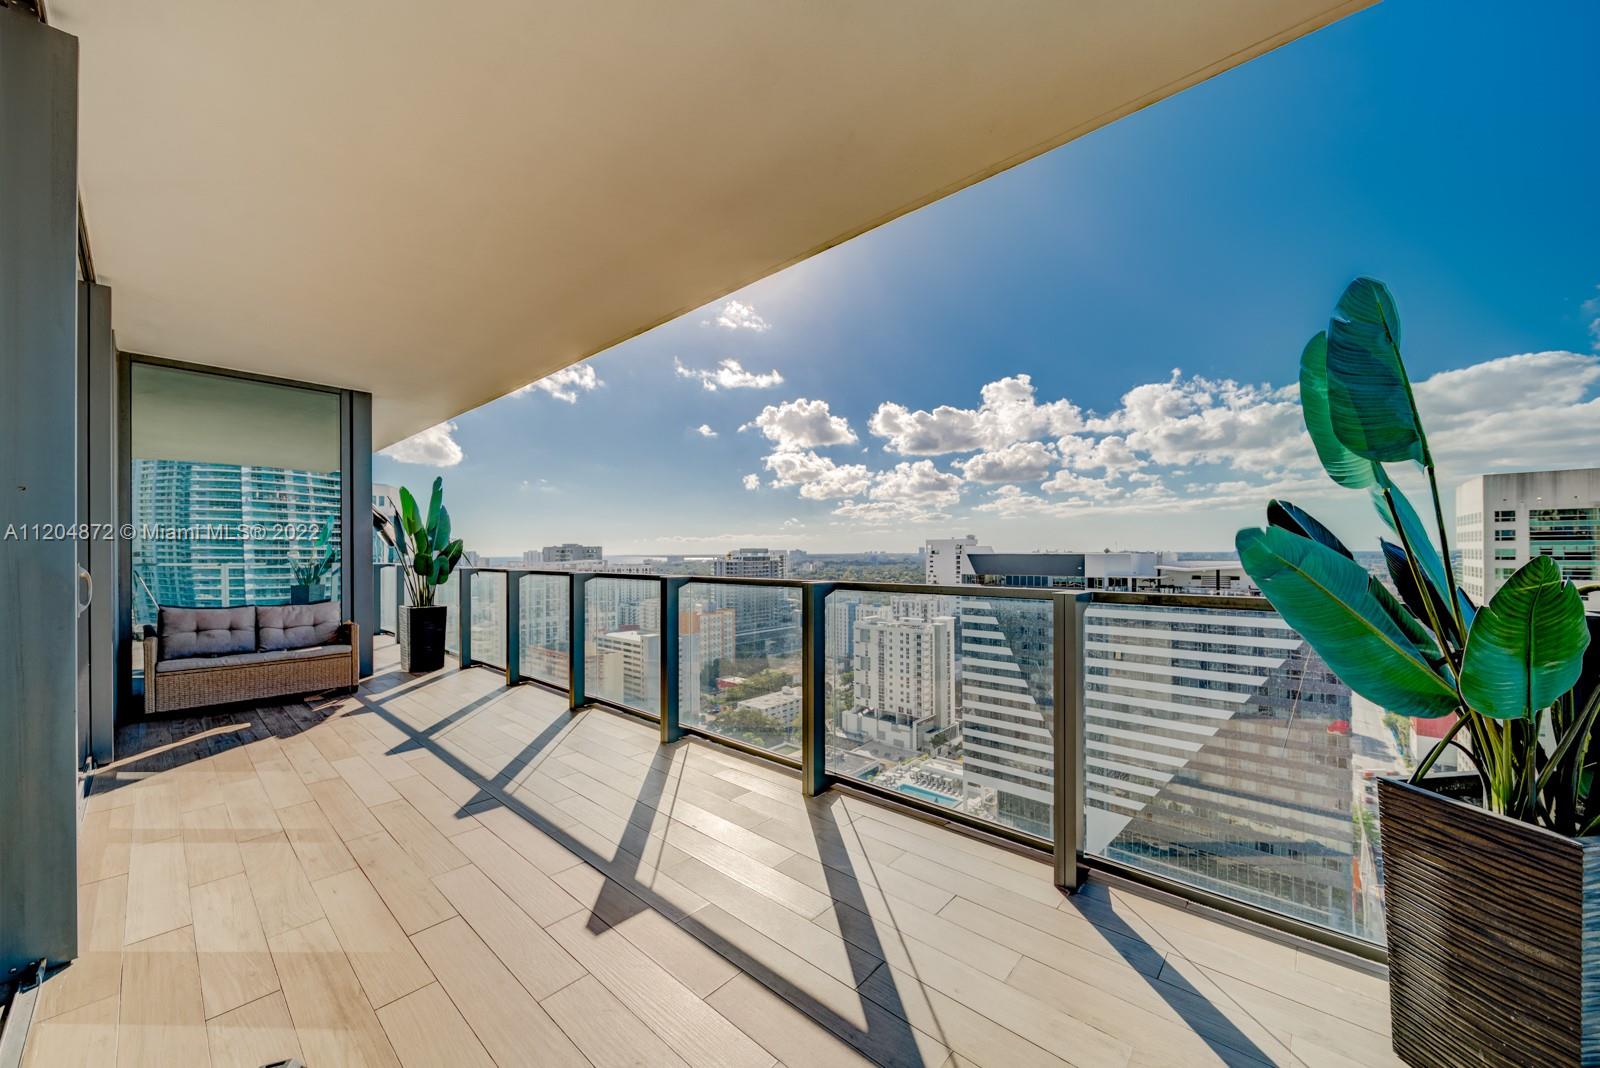 Welcome to the most desirable corner unit in the beautiful Brickell City Centre. Enjoy breathtaking panoramic views of the Miami skyline from the wraparound balcony. Entrance opens to a very ample living area brightened by natural sunlight all day. Gourmet kitchen with top of the line appliances. Washer & dryer in unit. 5 Star amenities, including pool, gym, business center, lounge areas, coffee, 24hr concierge, security and valet services. Walk downstairs to restaurants, mall, metrorail, and more to mention.